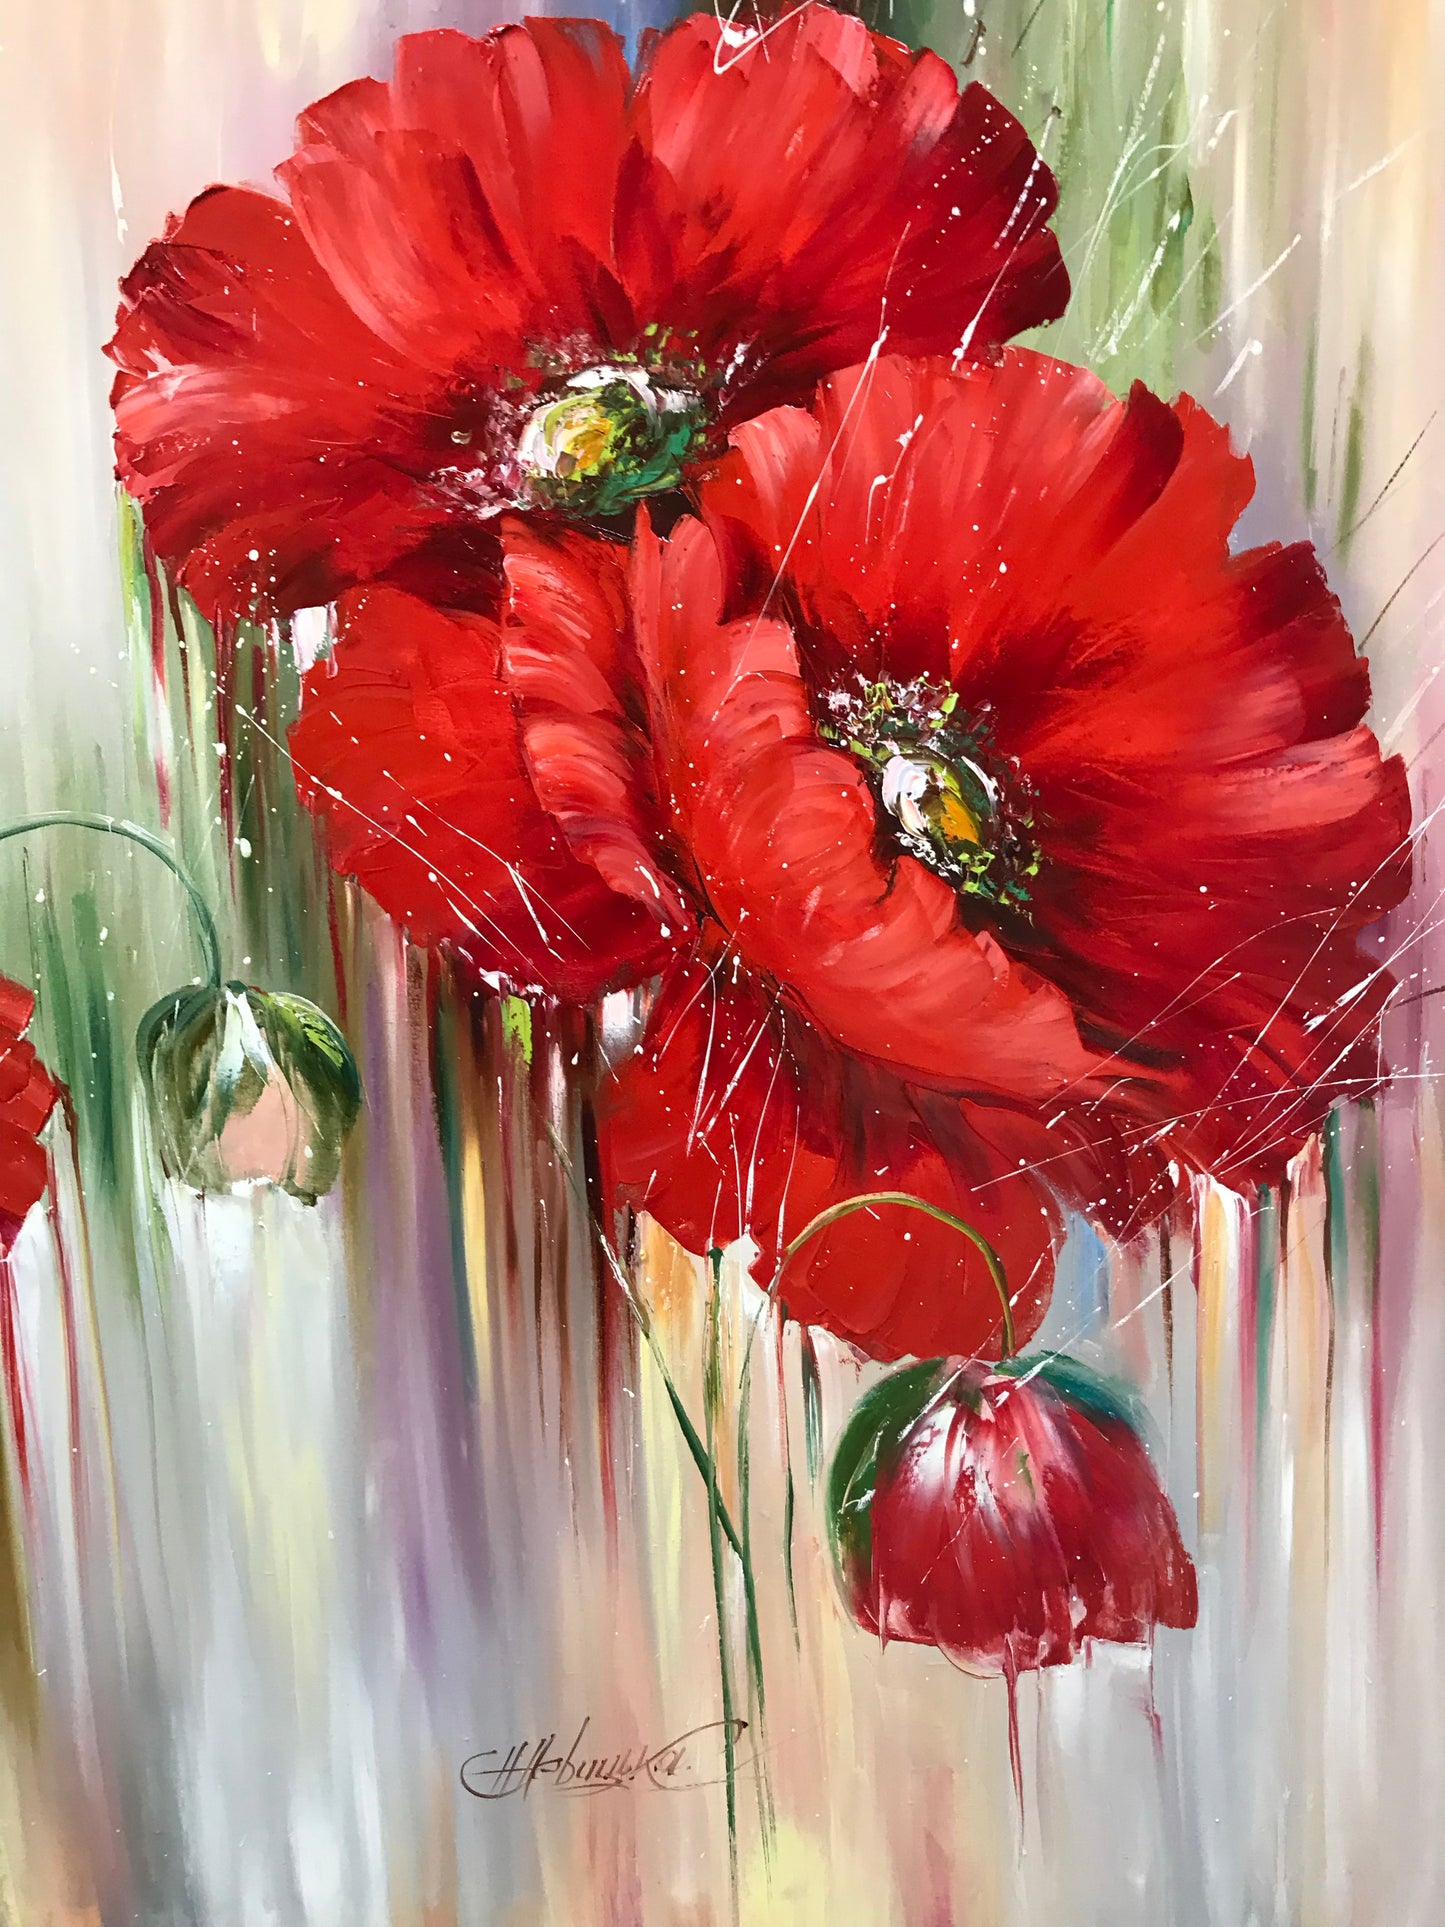 Abstract Red Poppies Painting, Big Flowers Wall Decor, Red Flowers Painting on Canvas, Large Poppy Flower Oil Painting